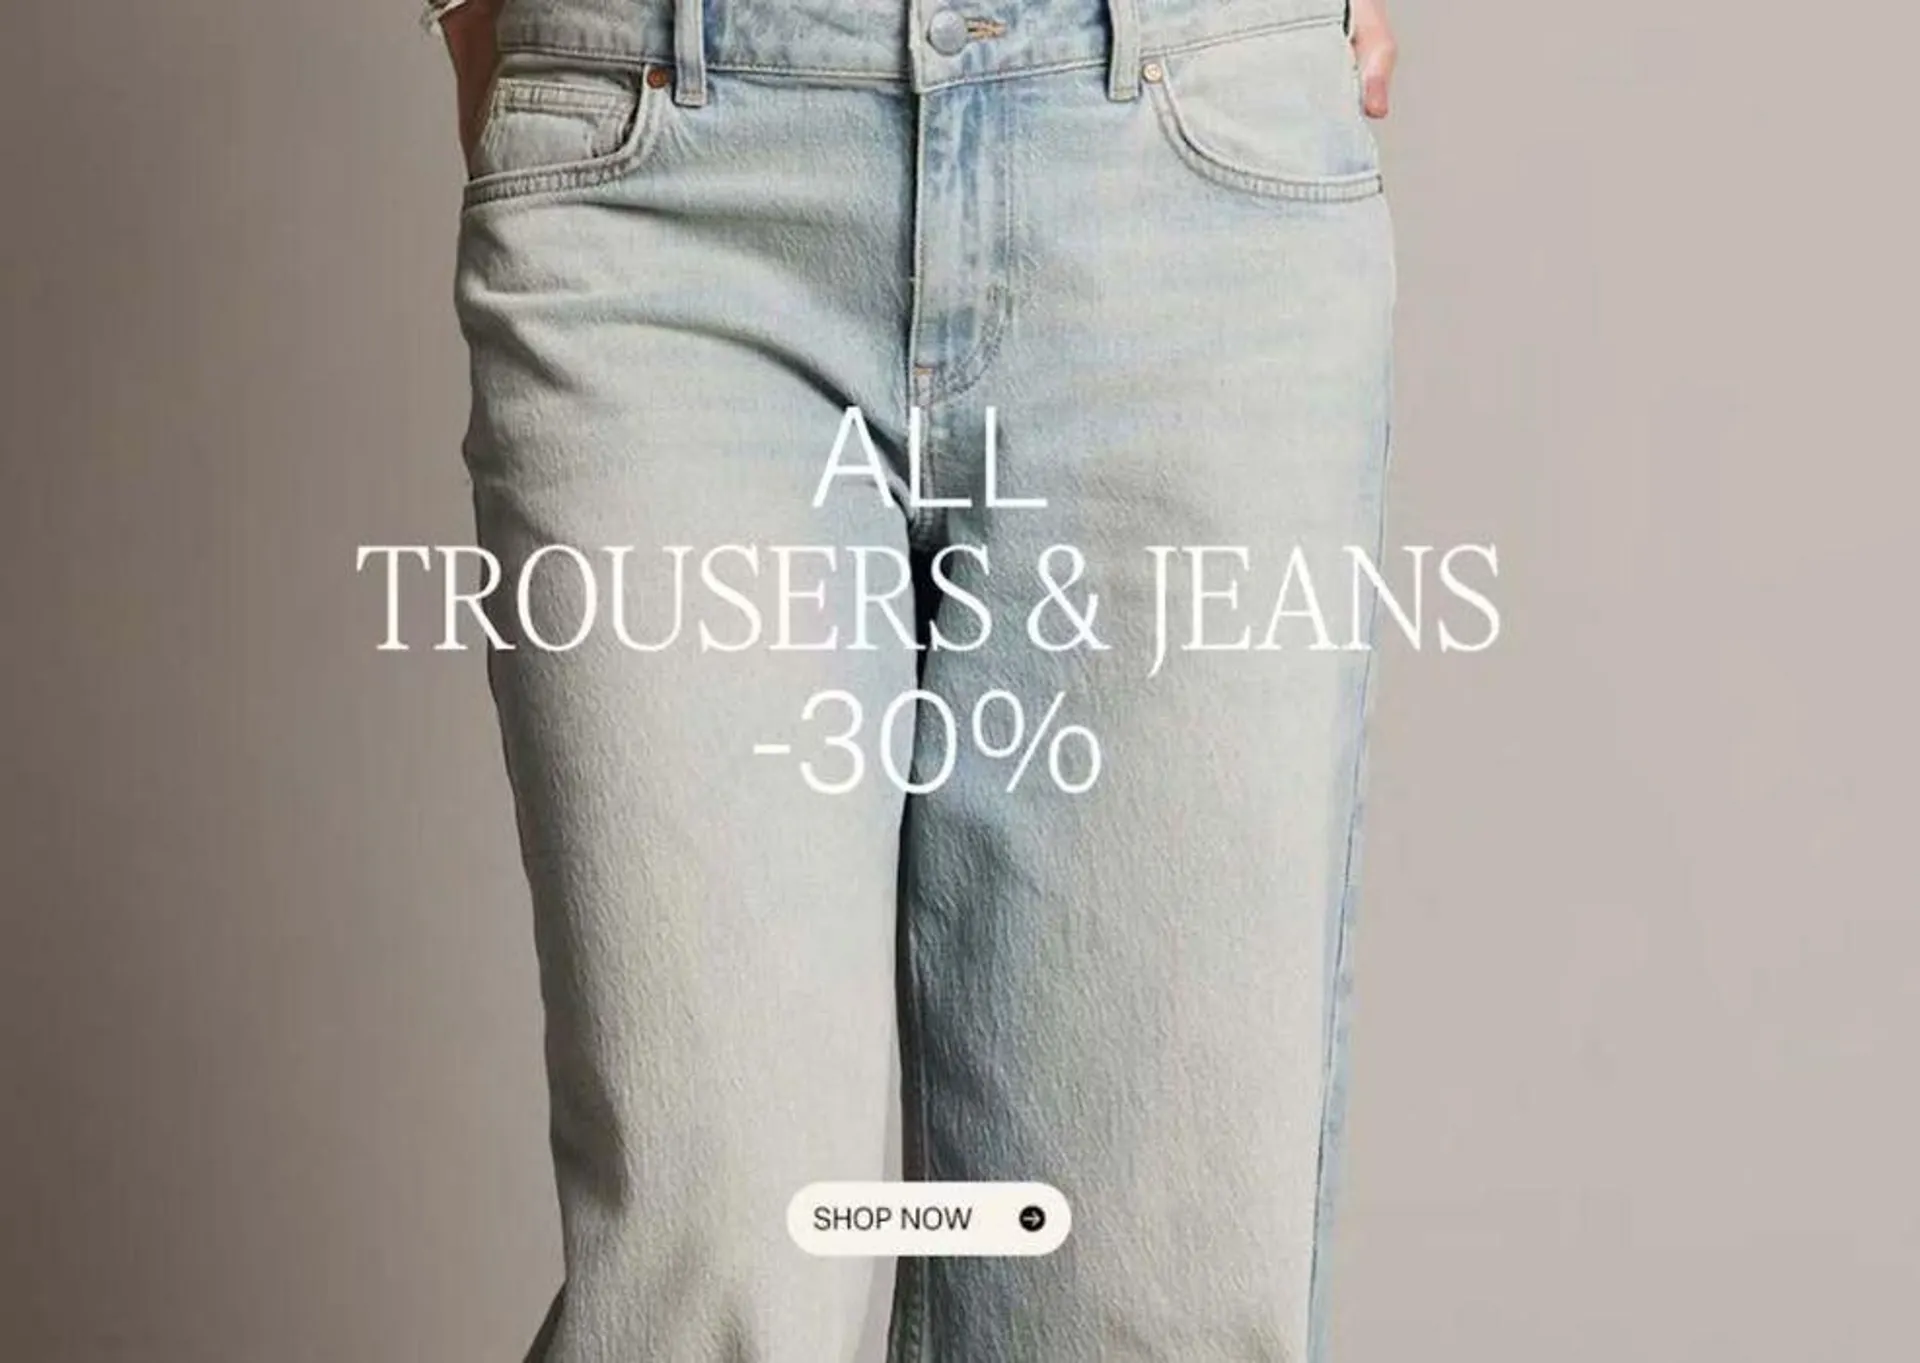 All Trousers & Jeans -30% - 1